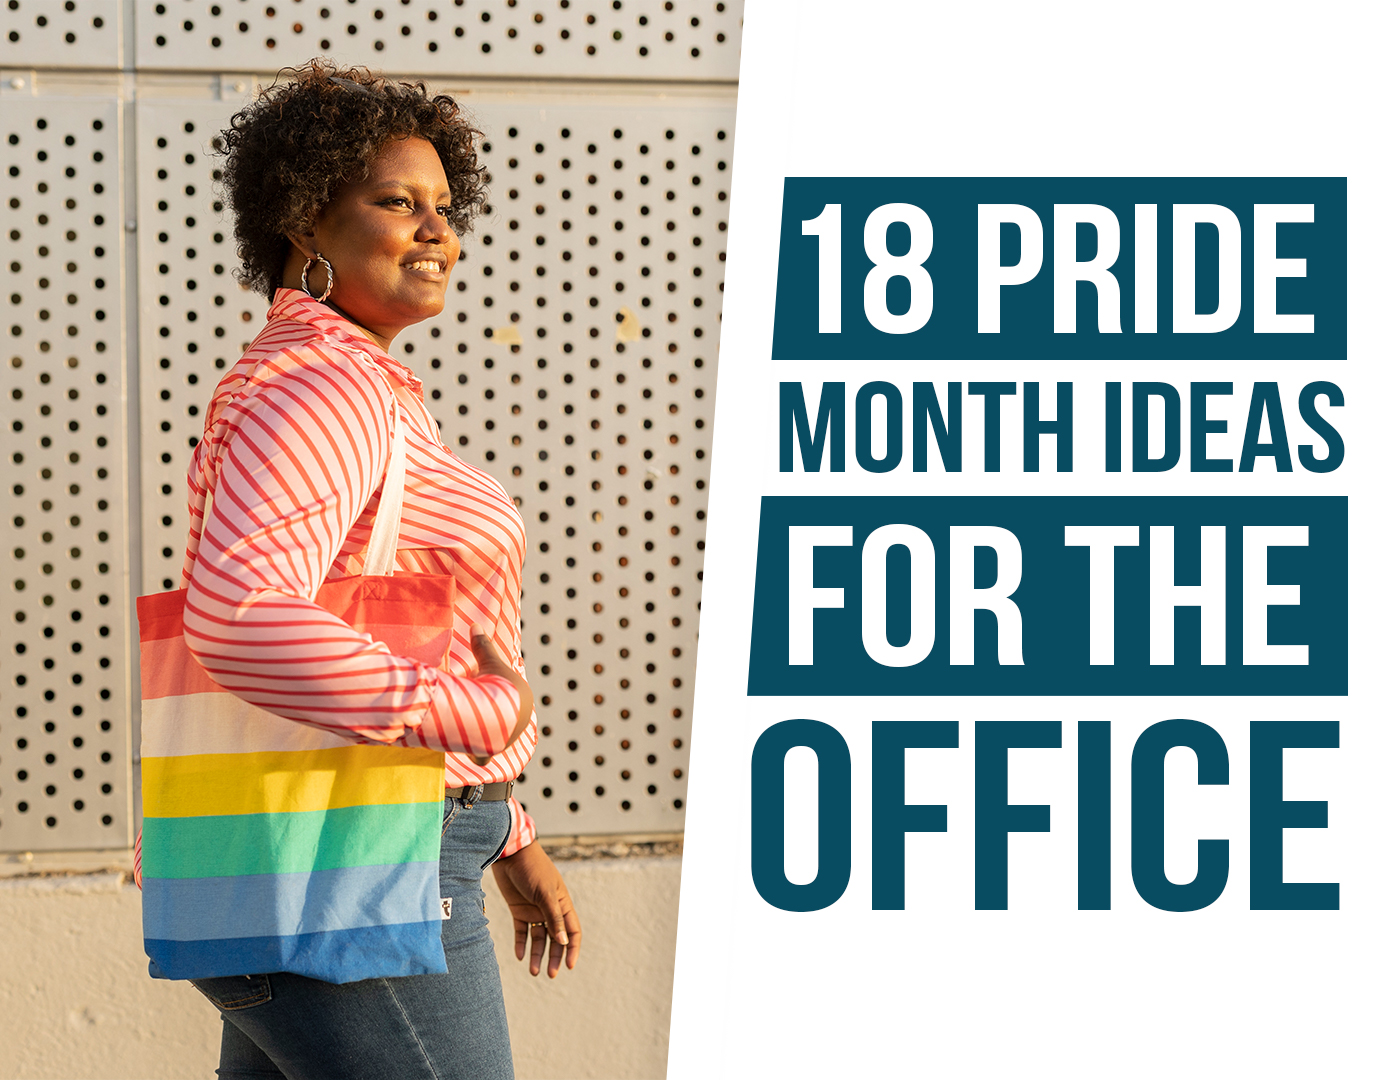 18 Pride Month Ideas for the Office